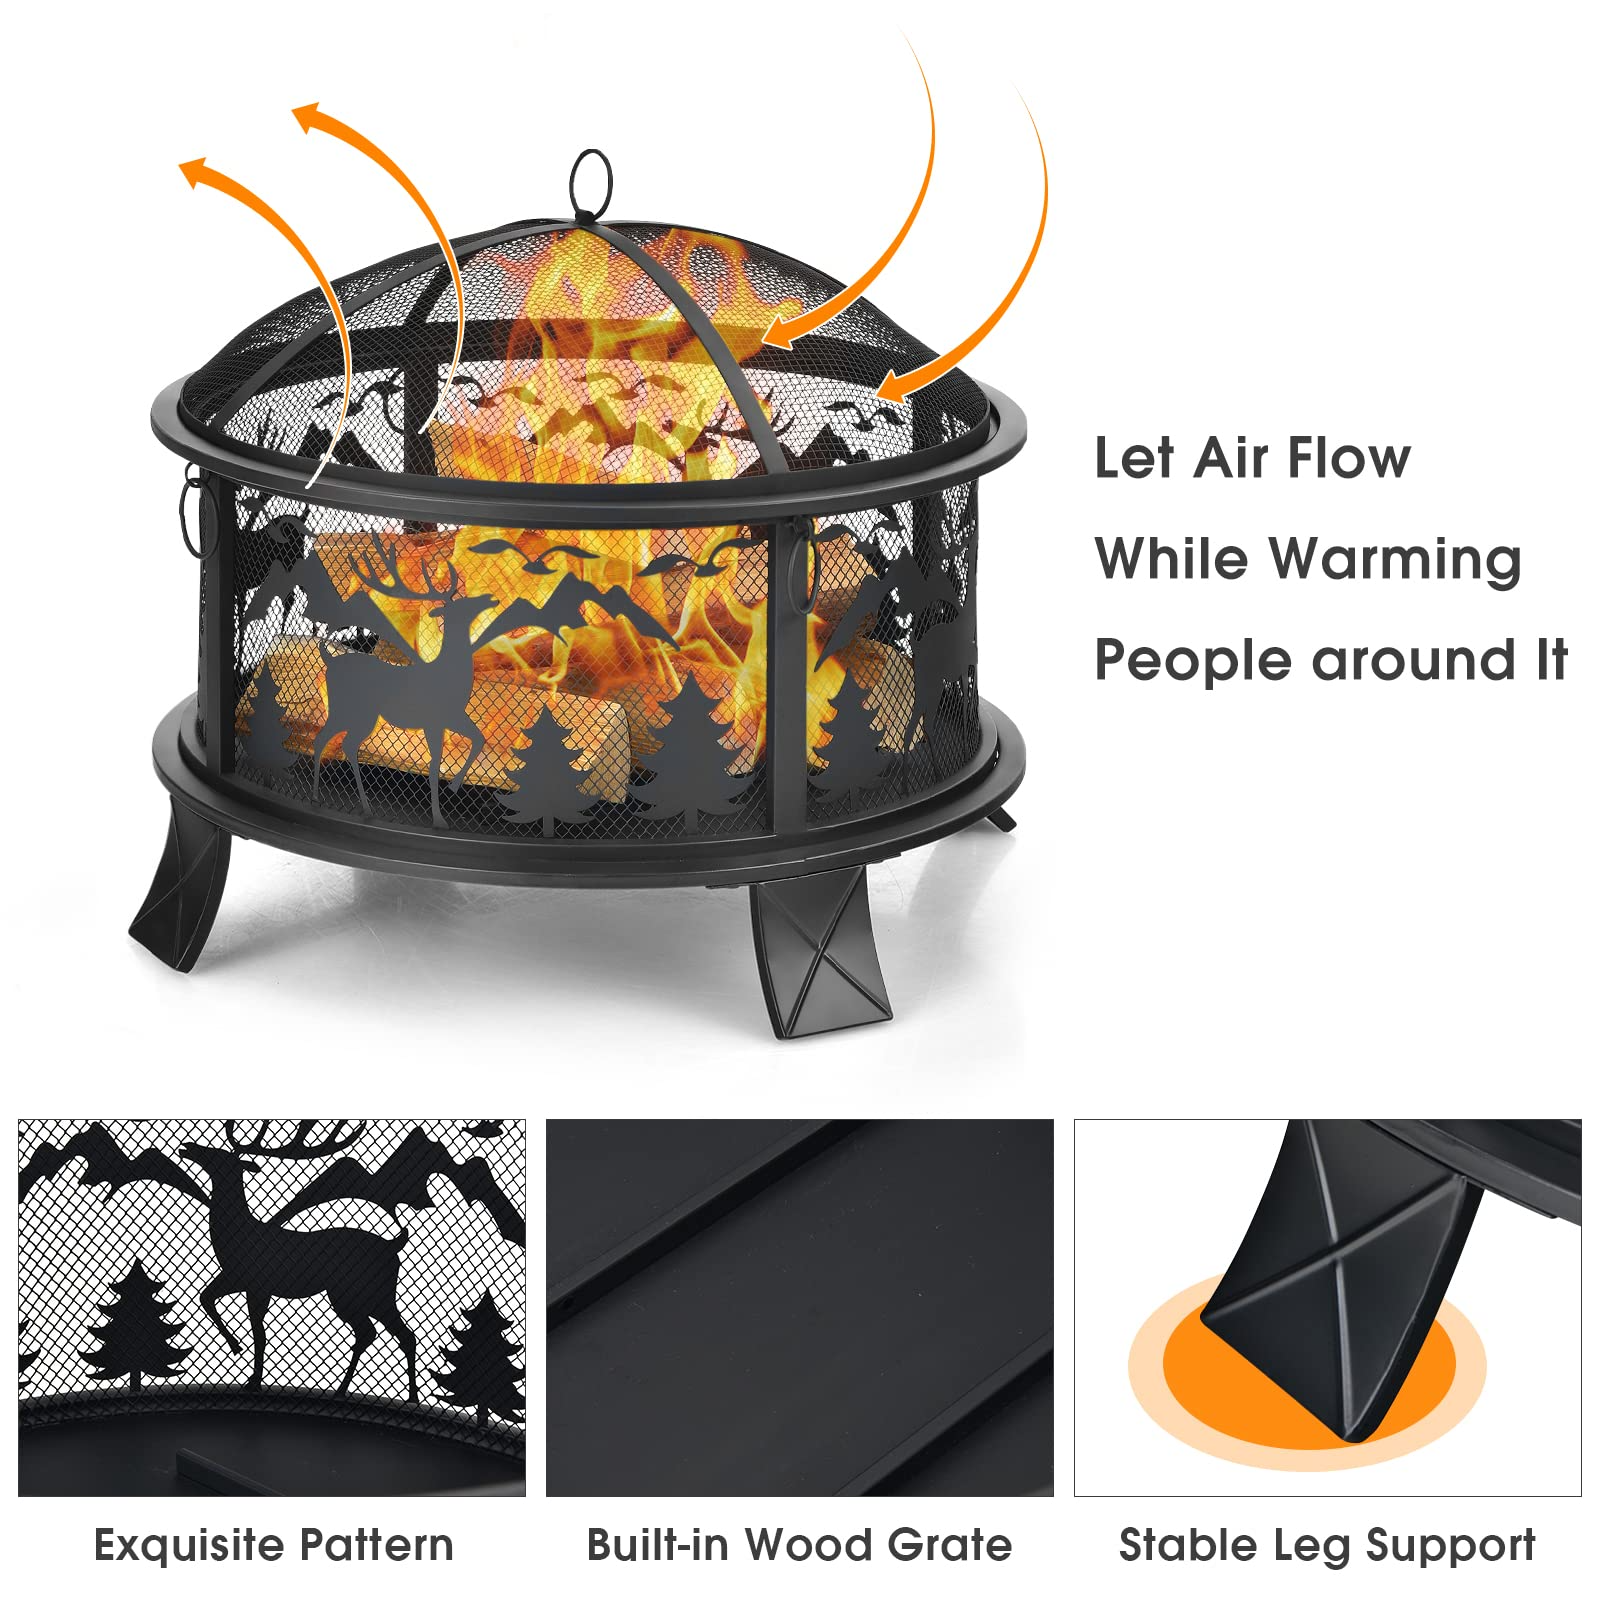 26 Inch Outdoor Firepit for Backyard, Garden and Patio Bonfires with Spark Screen